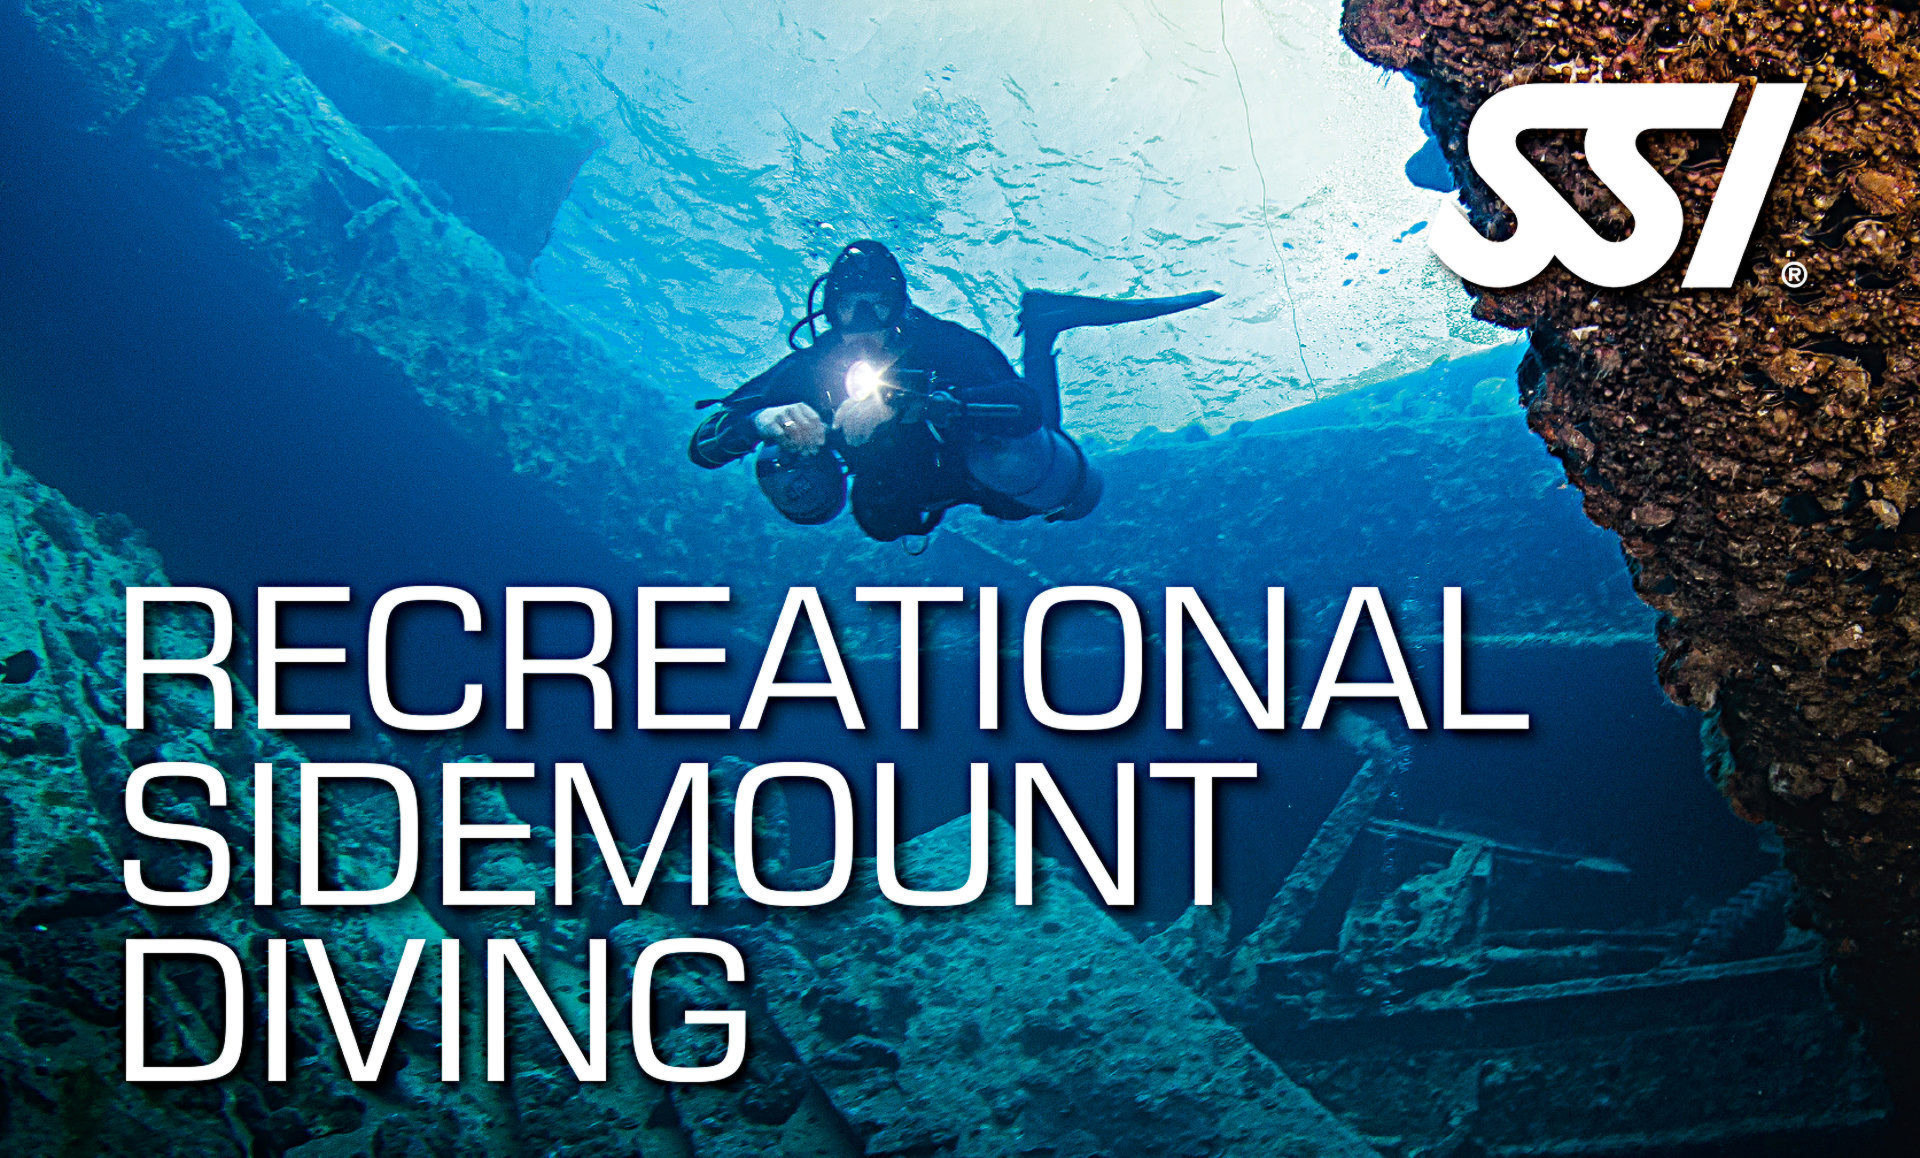 The SSI Recreational Sidemount Diving course and certification